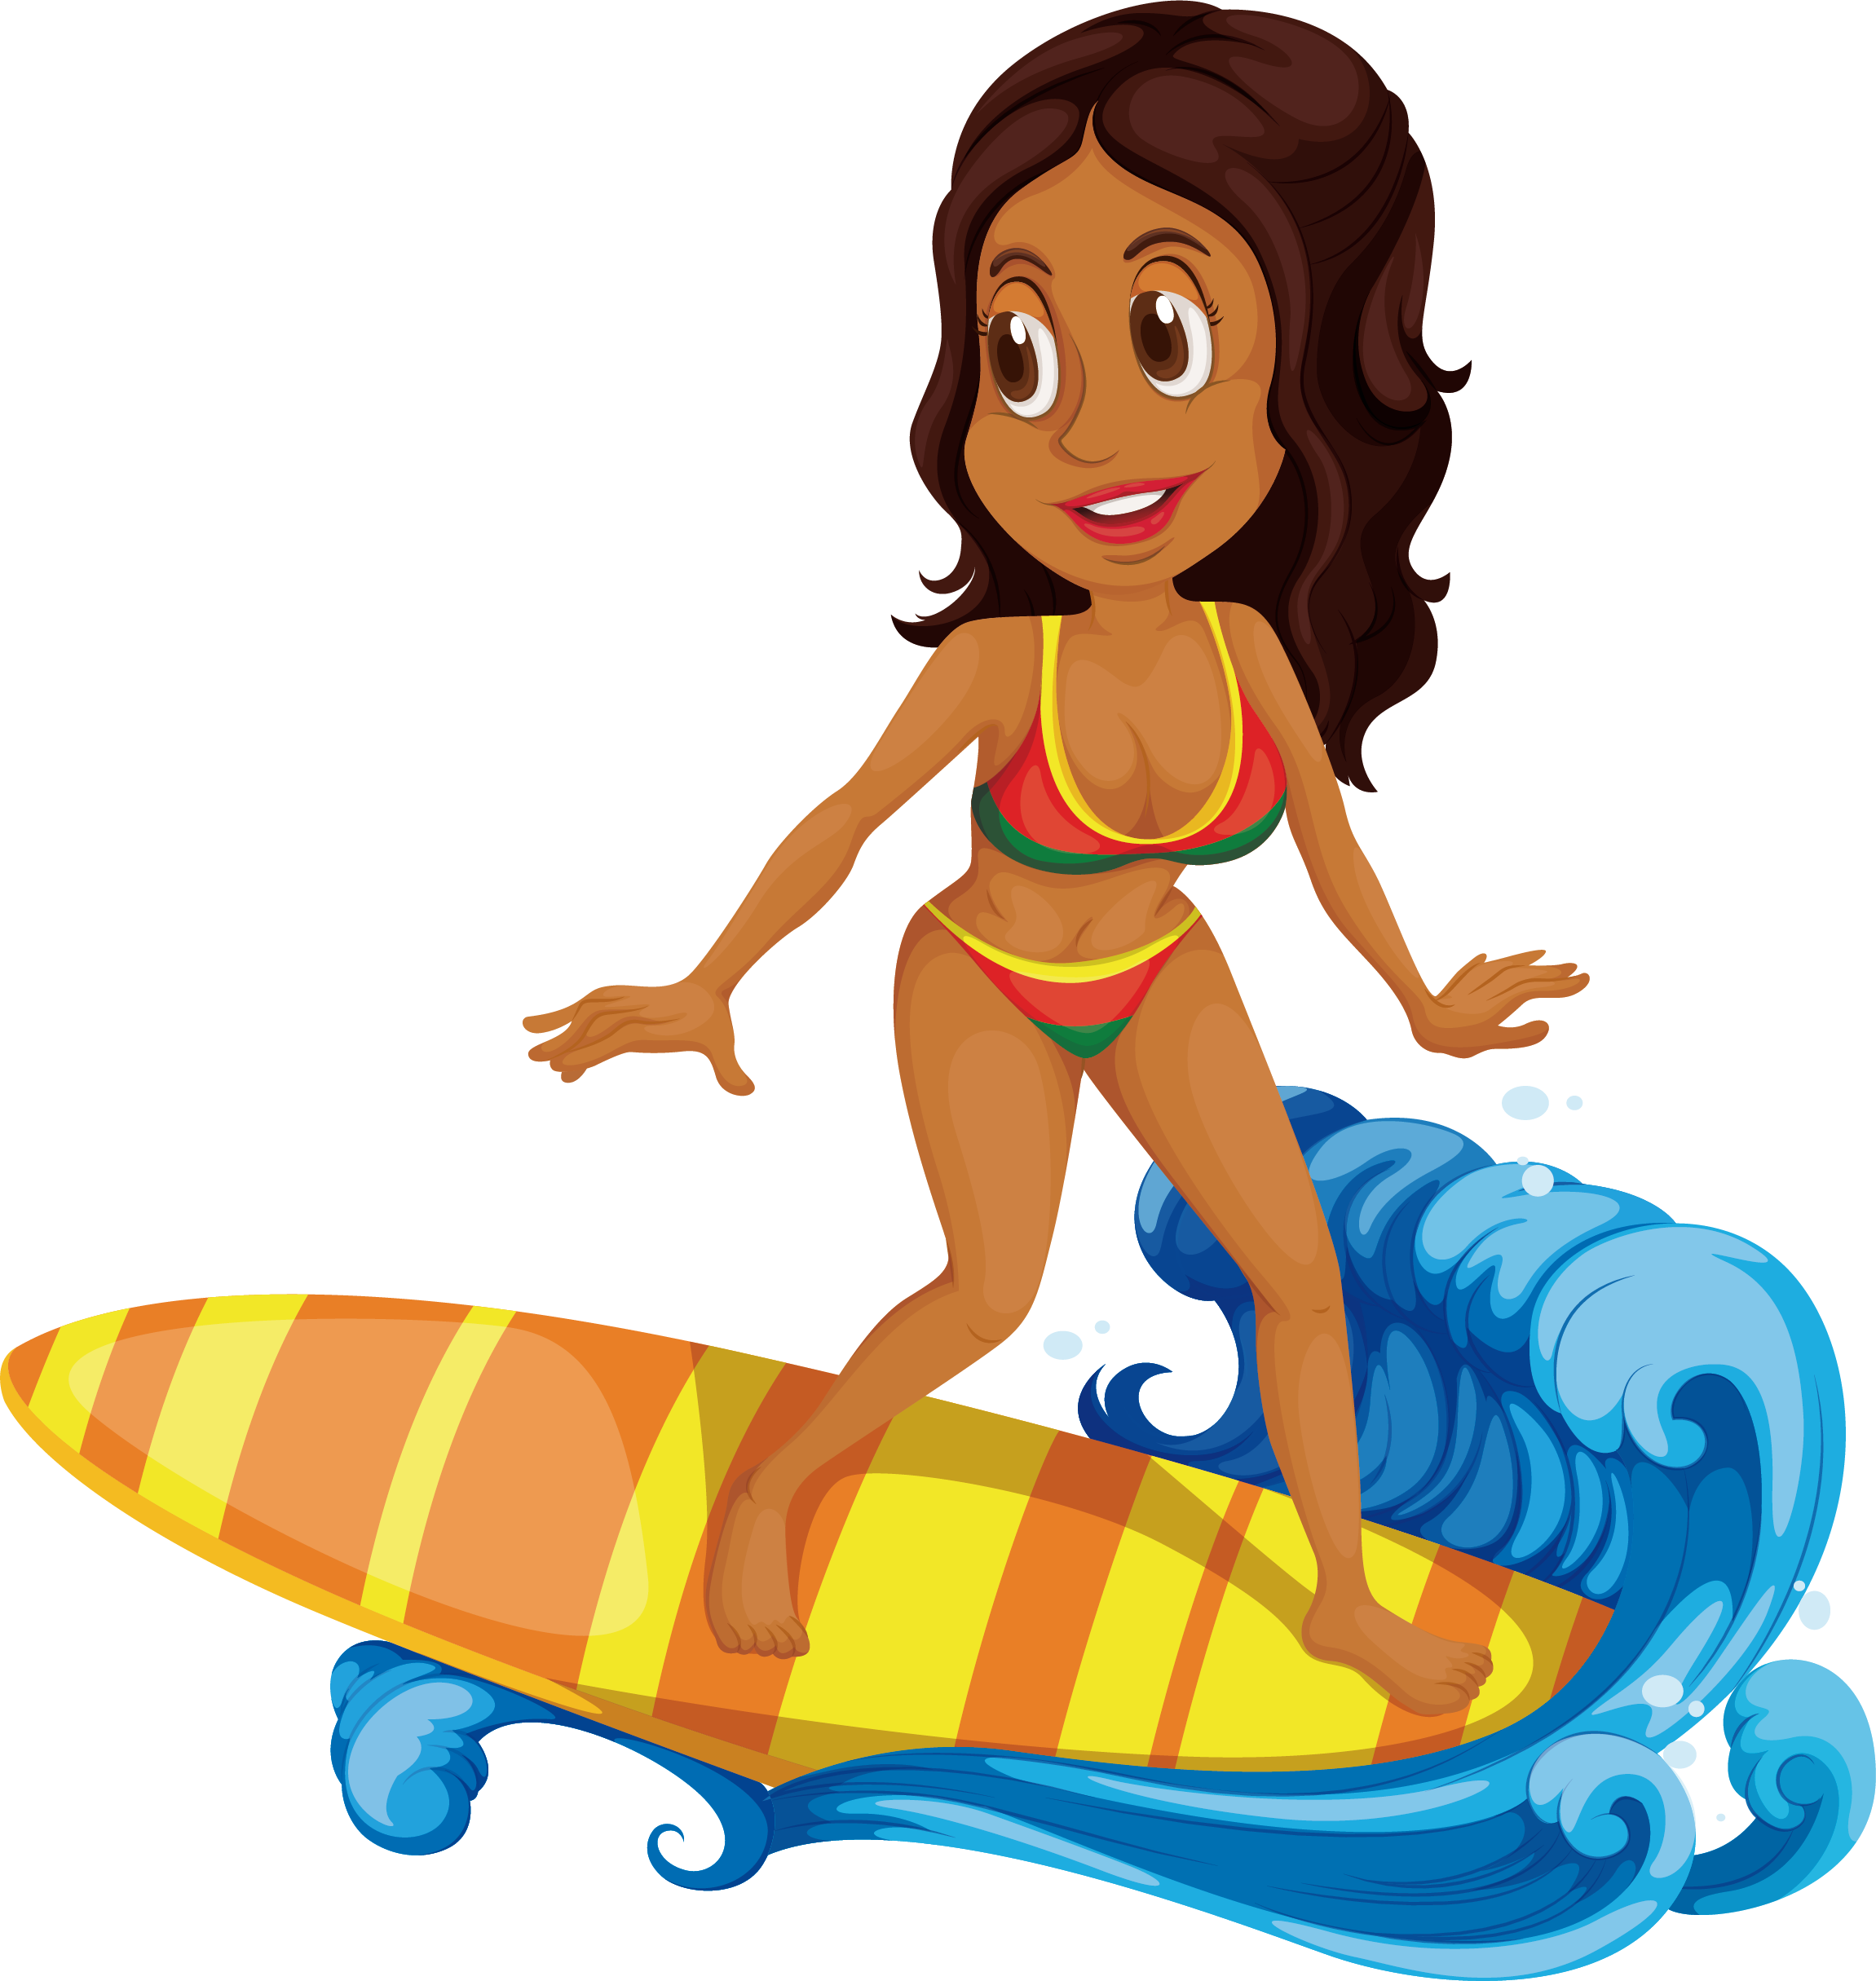 Surfing clipart 2101123.